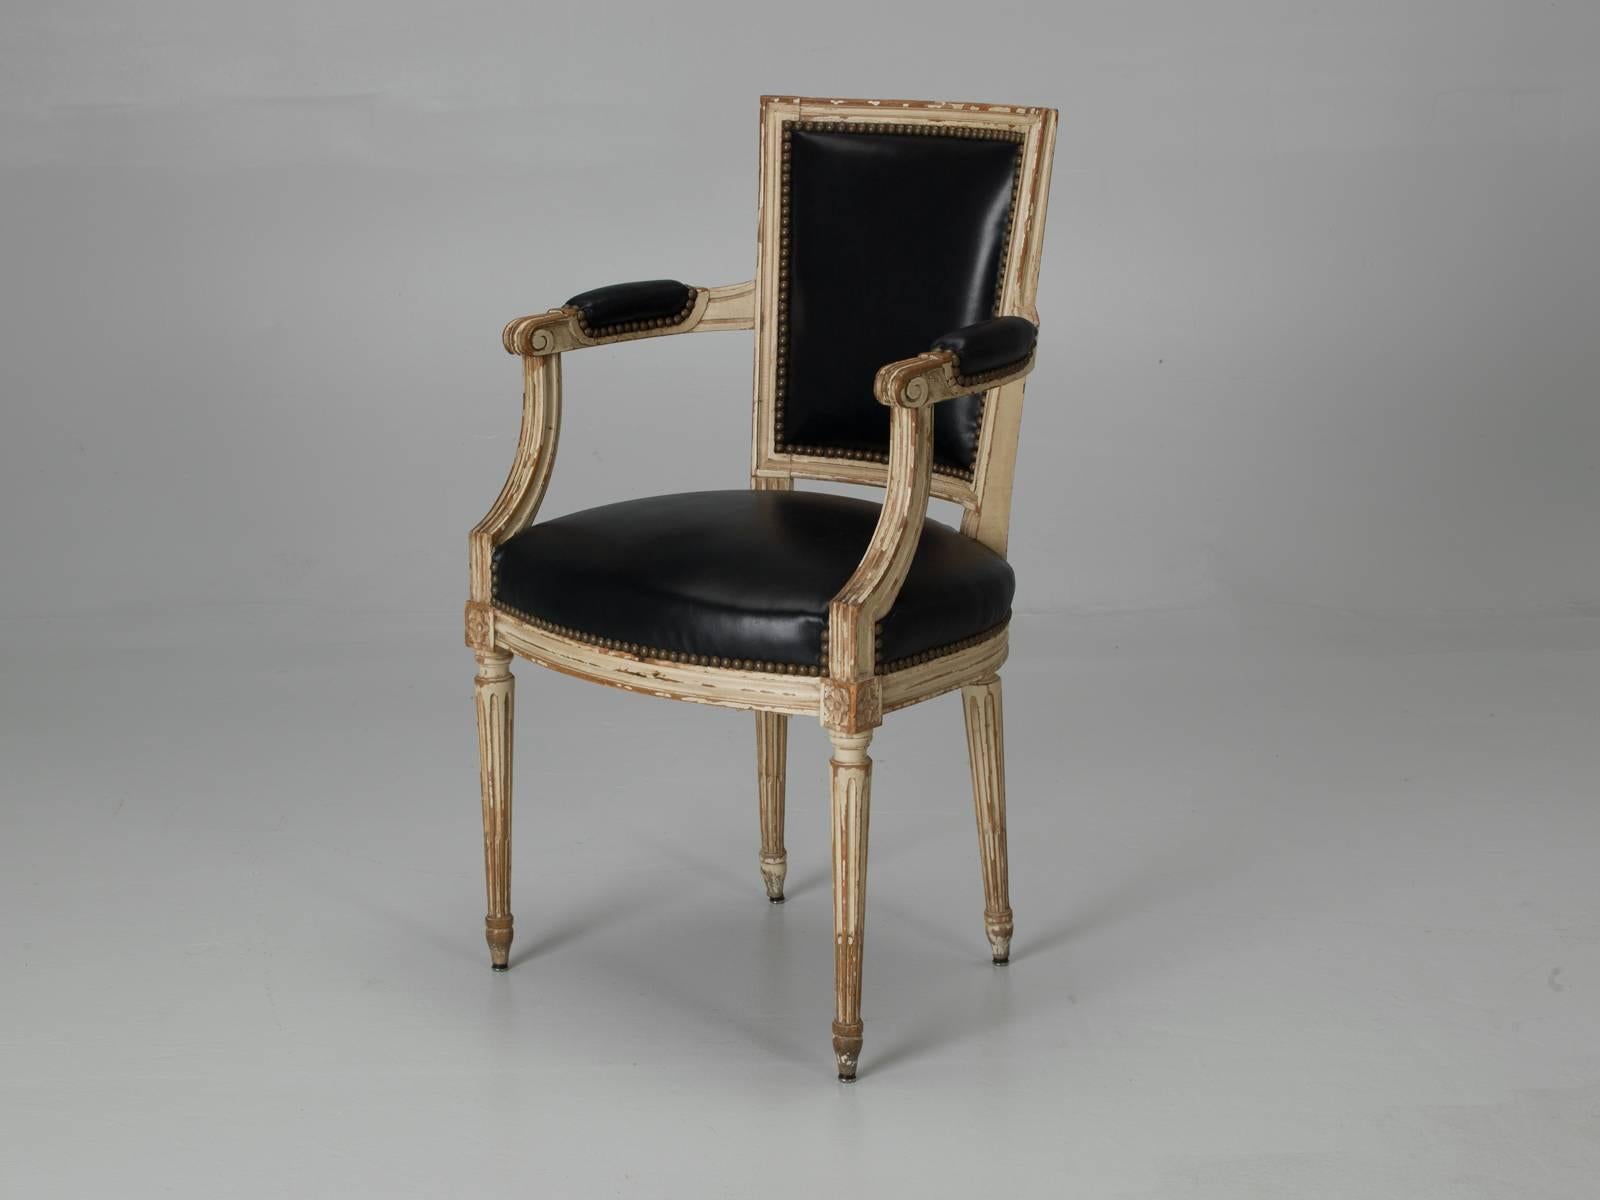 Antique Louis XVI Style French Dining Chairs in Original Paint and Black Leather (Französisch)